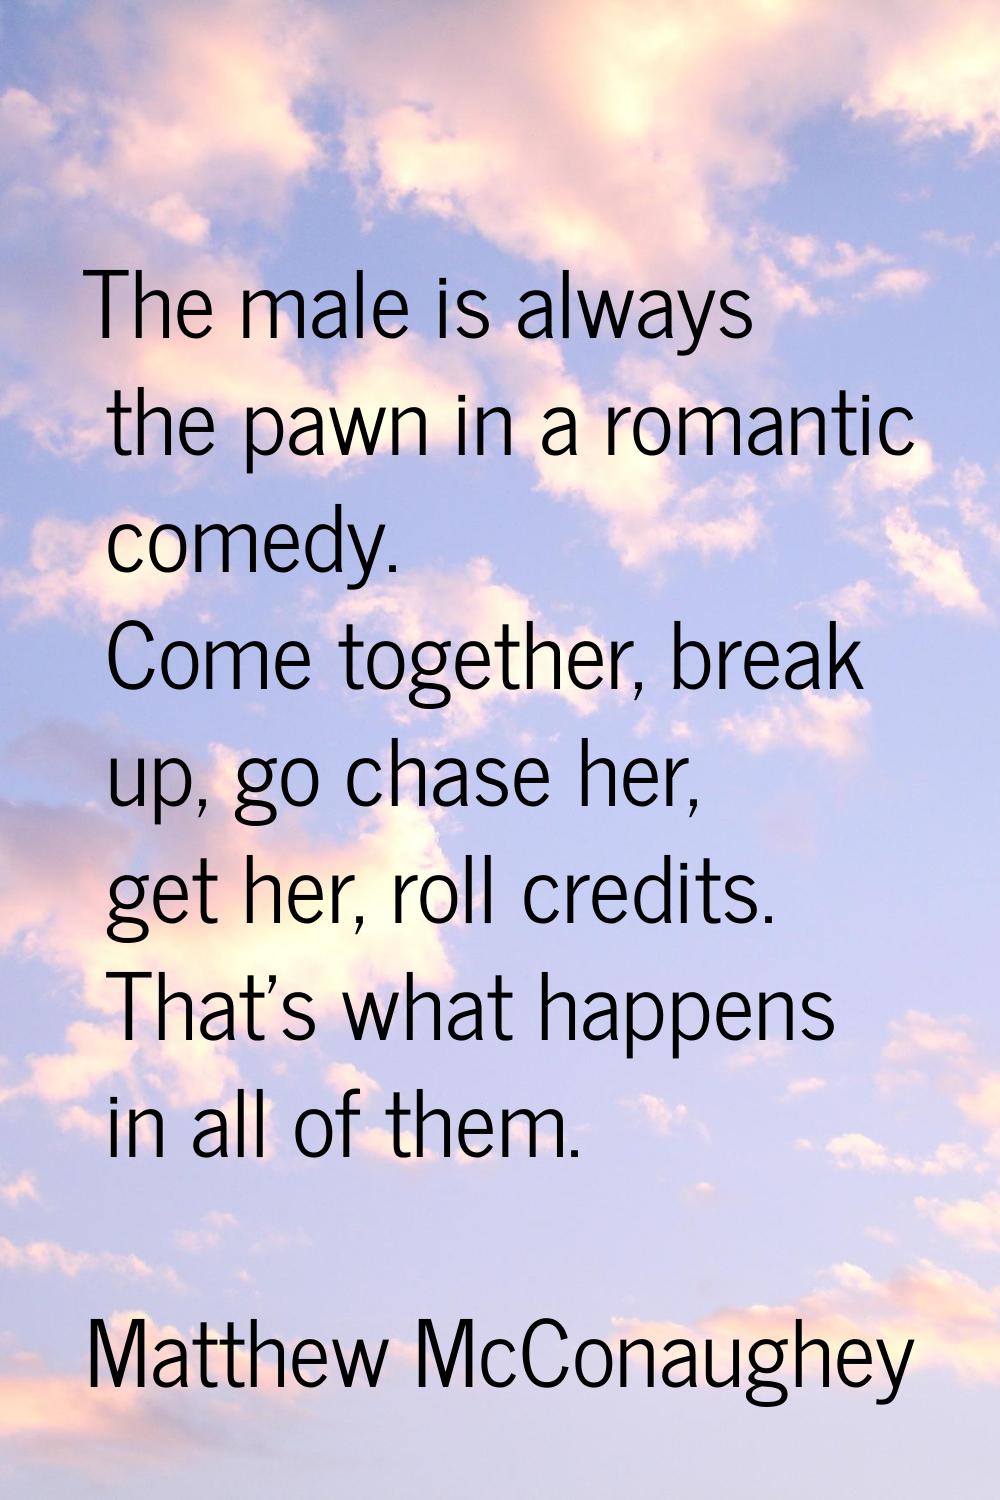 The male is always the pawn in a romantic comedy. Come together, break up, go chase her, get her, r